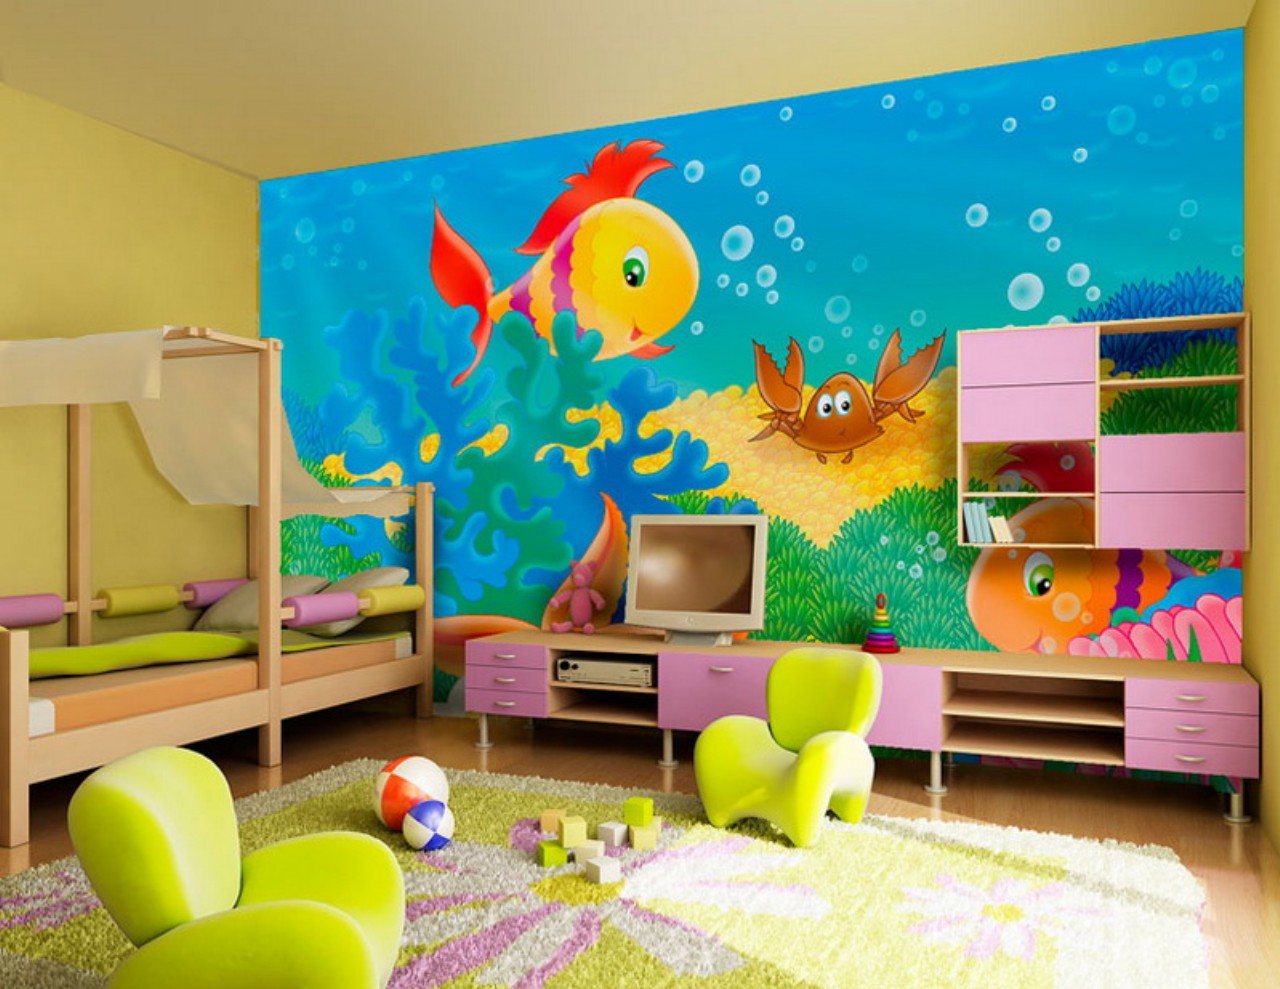 Kids Room Girl Lovable Kids Room Furniture For Girl Design Ideas With Sweet Under Water World Theme Toddler Kids Bedroom Idea With Unique Wood Twin Bed Design And Cute Pink Accents Furniture Composing The Special Type Of Kids Room Furniture